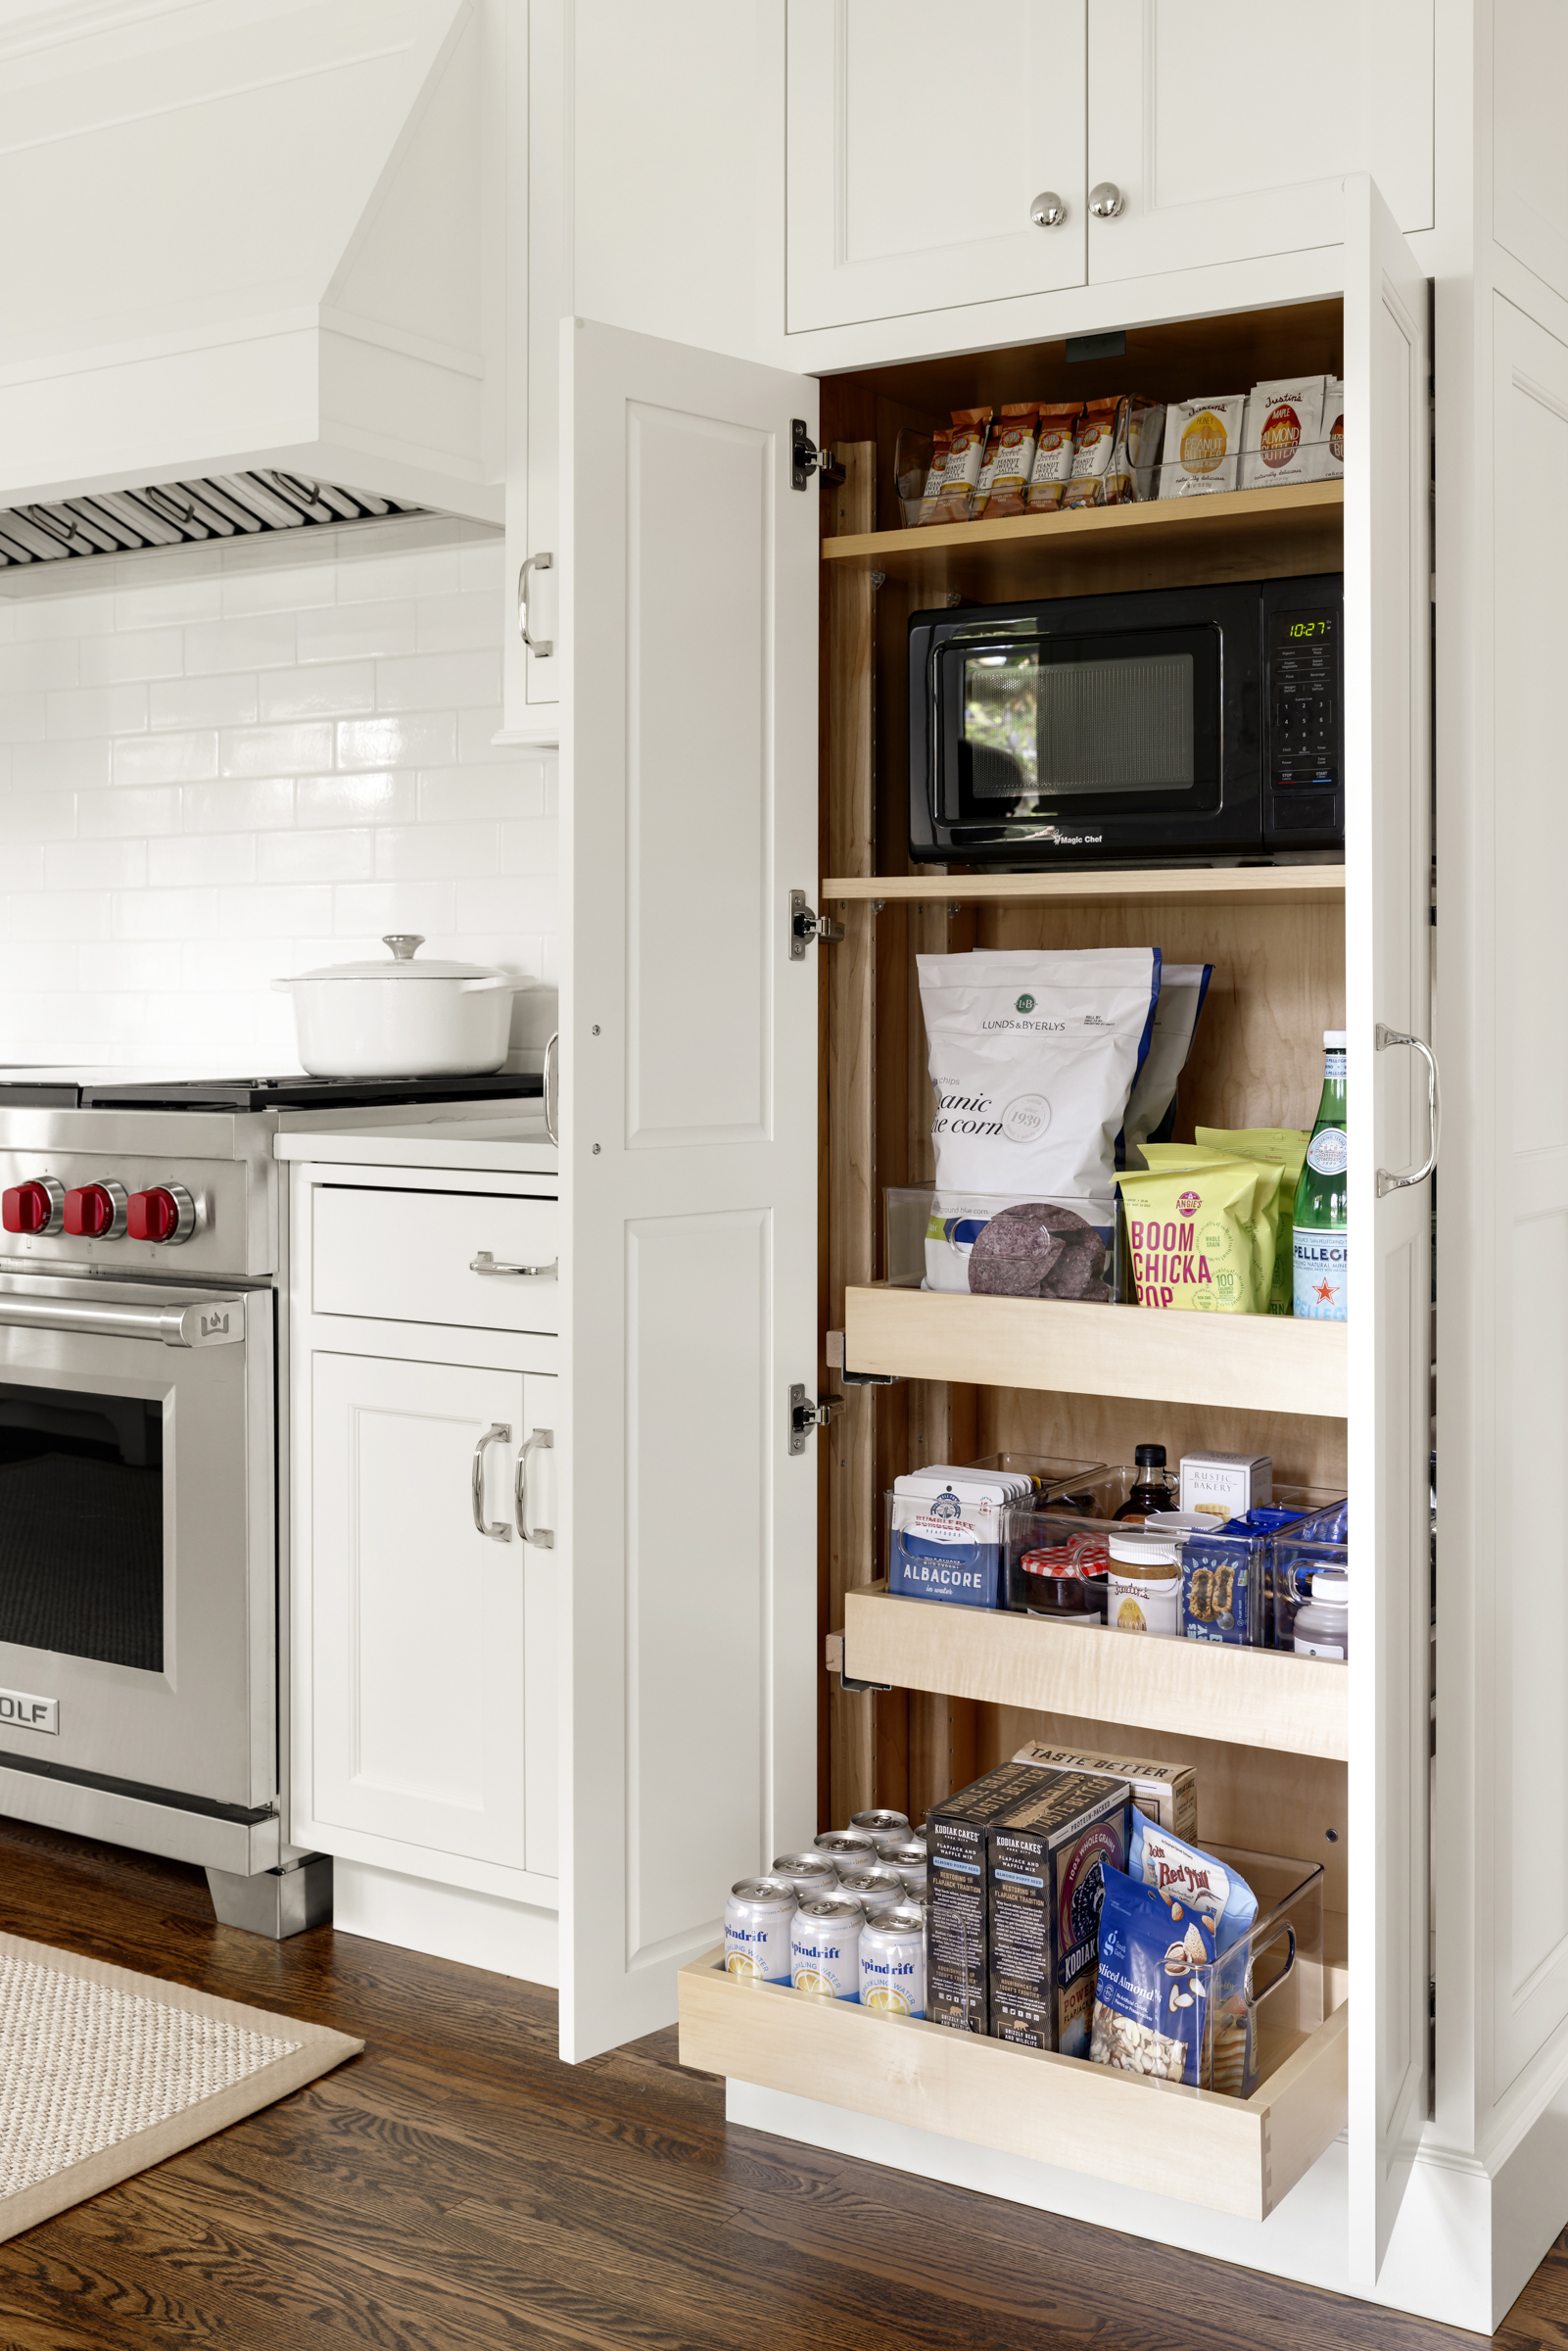 Kitchen renovation with large pantry cabinet with pull out shelving in kitchen remodel with white cabinets